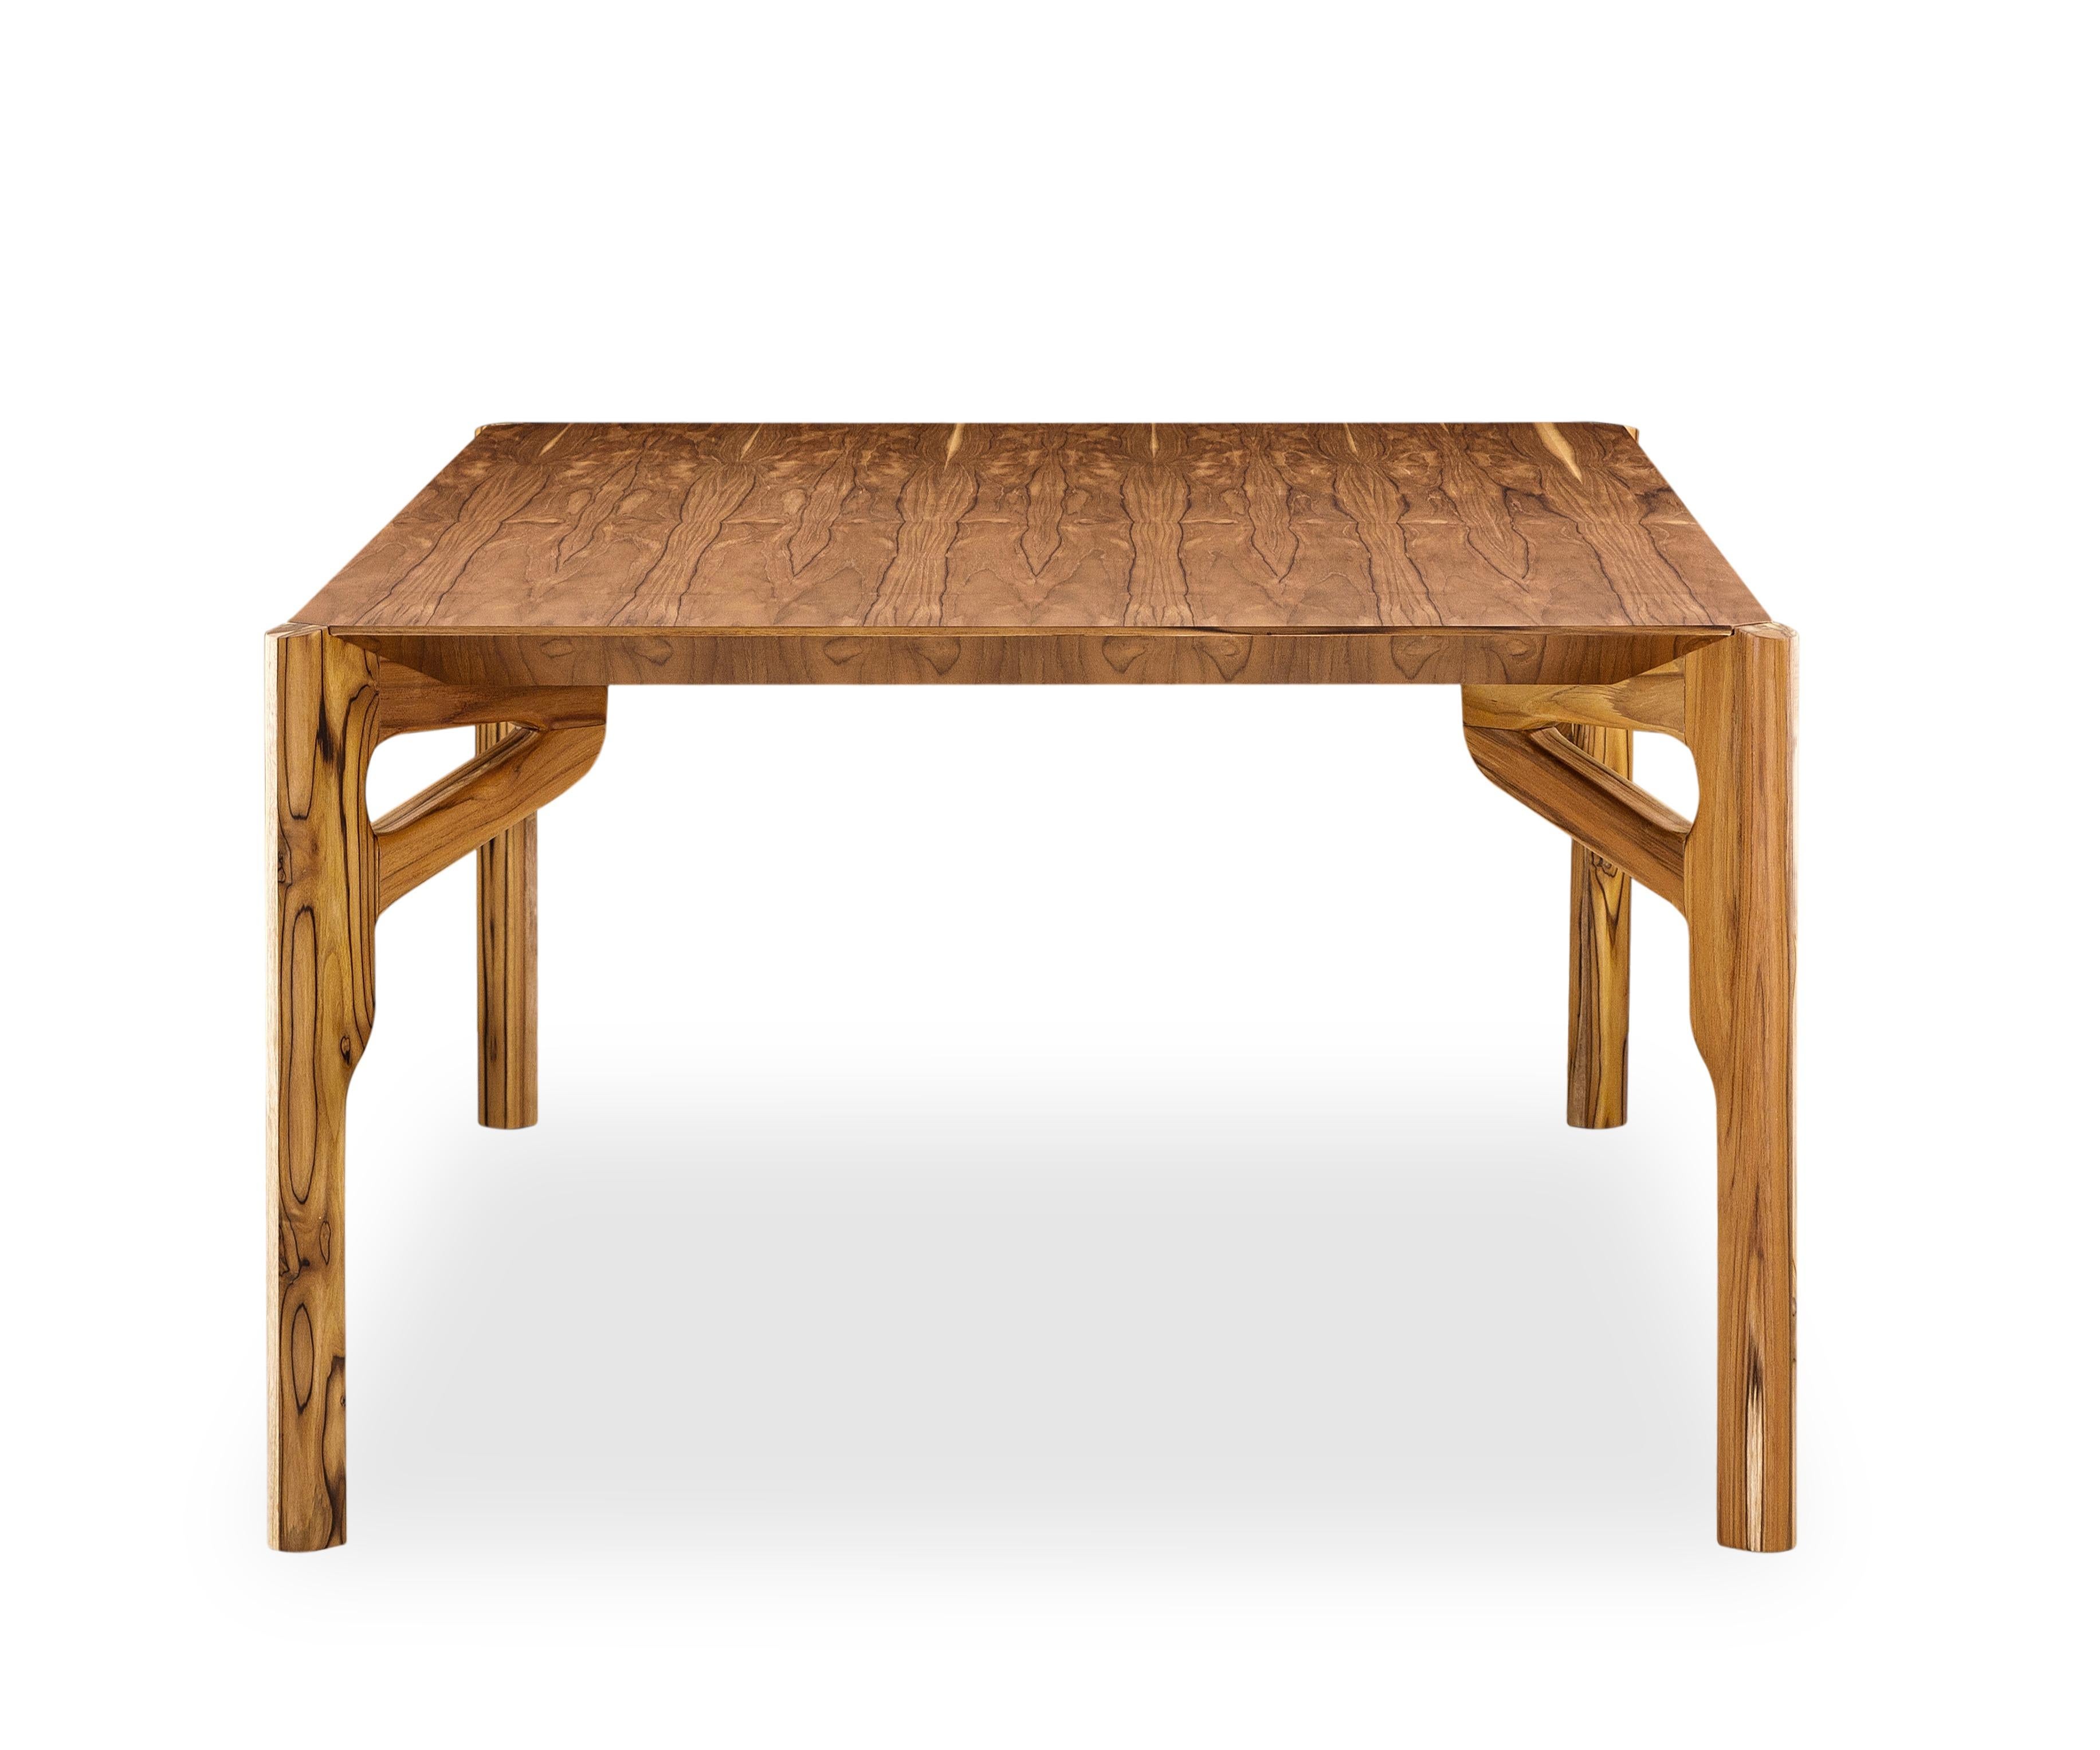 The Hawk dining table has been designed by our Uultis Design team with a teak finish veneered table, the perfect addition to any dining room. It is a sophisticated table for modern contemporary decor, inspired by Brazilian culture. The large